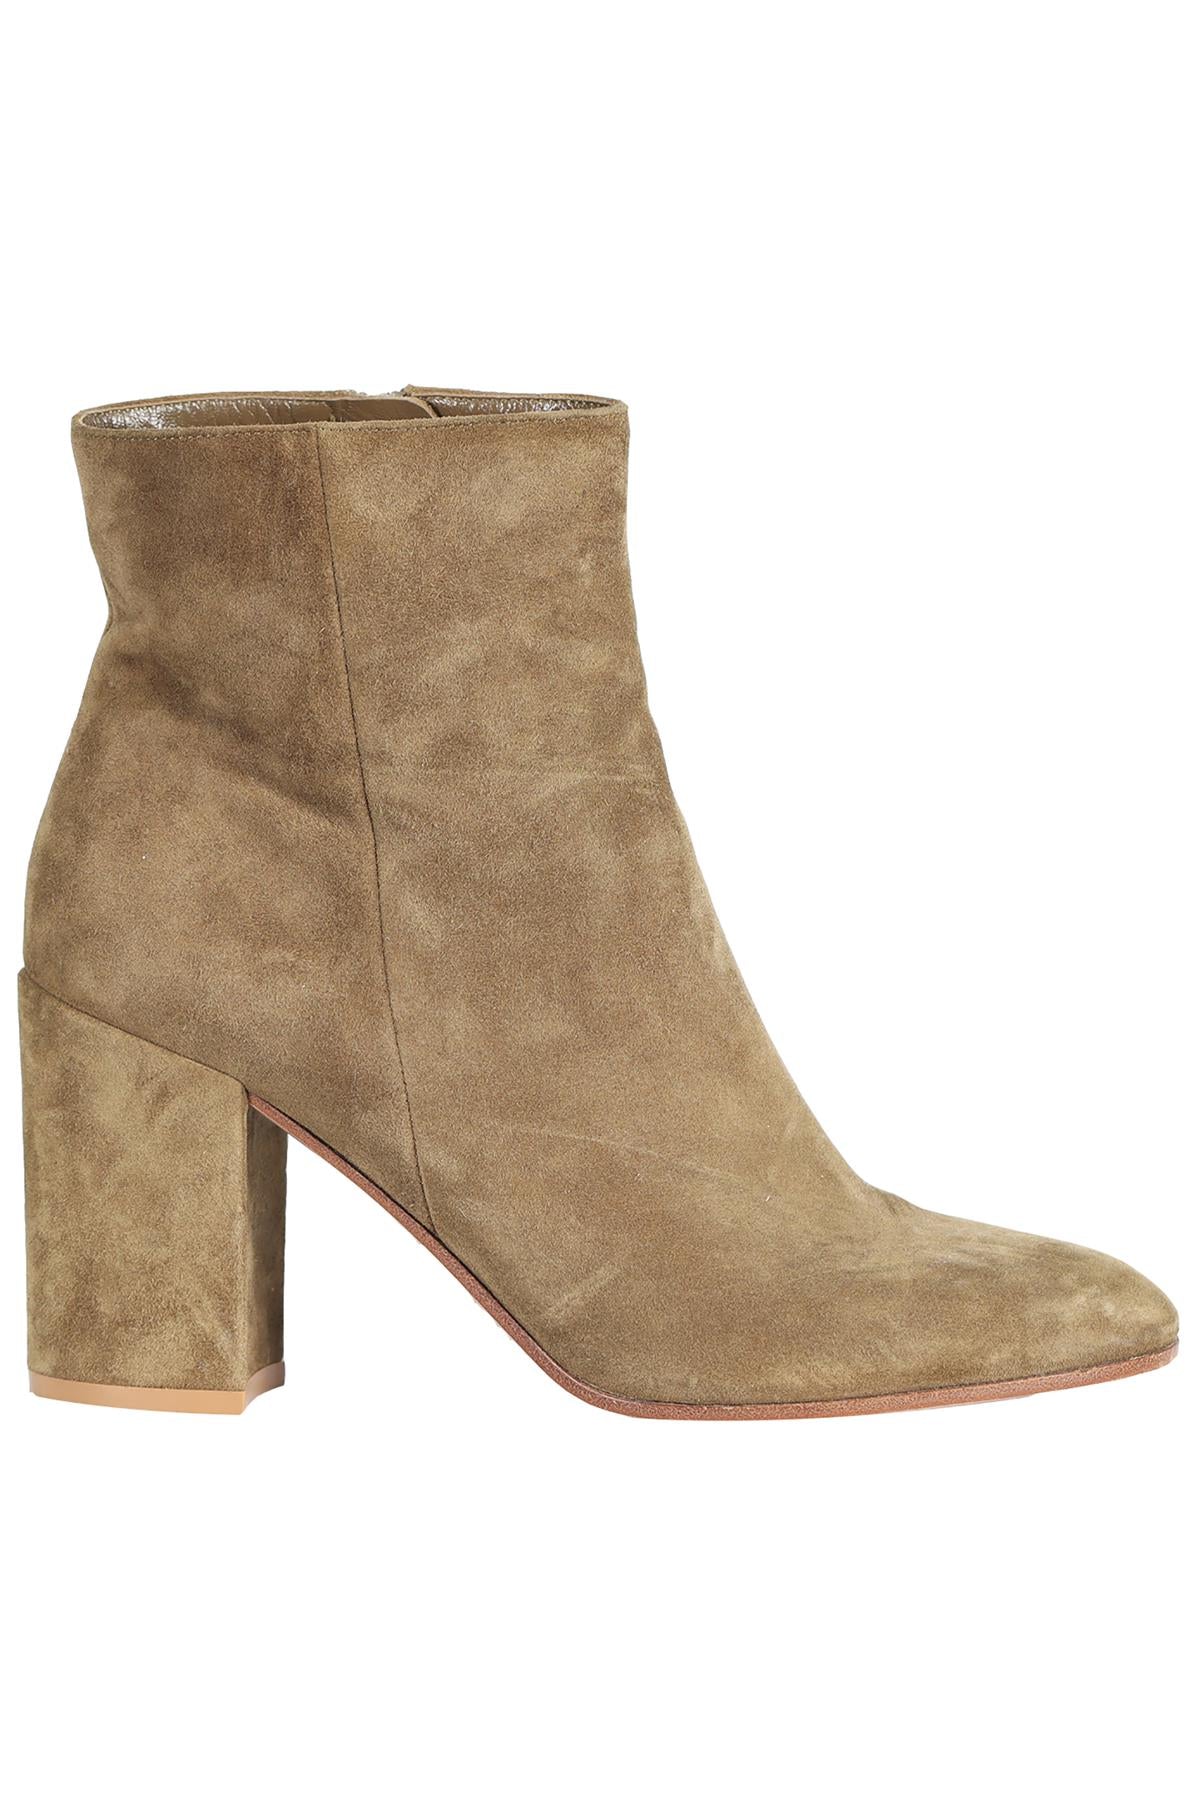 GIANVITO ROSSI SUEDE ANKLE BOOTS EU 37.5 UK 4.5 US 7.5